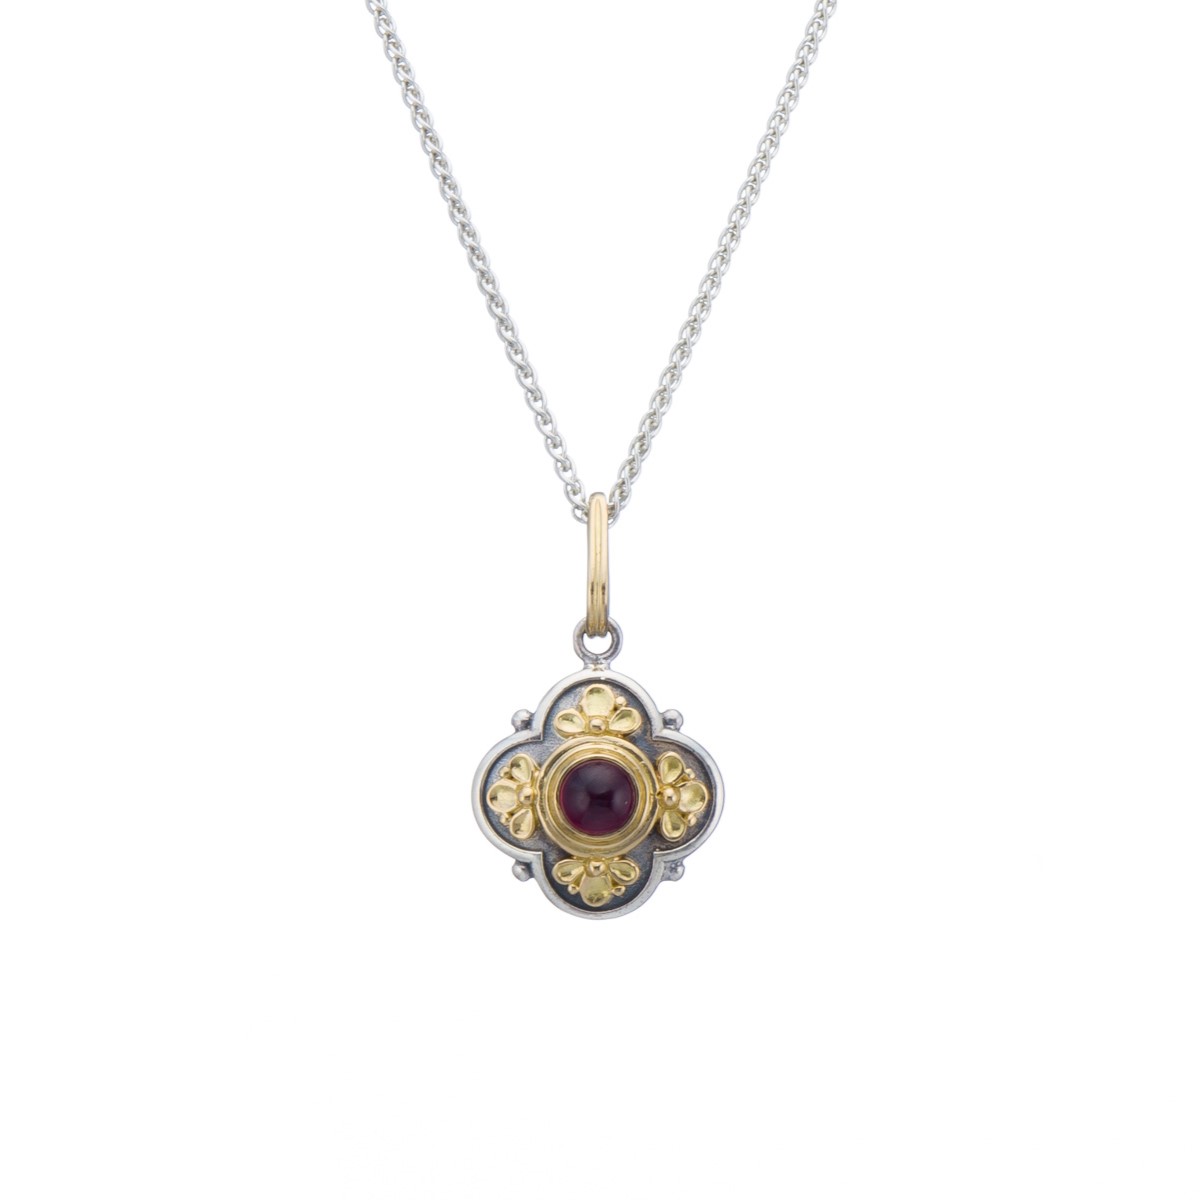 Athenian flower Byzantine pendant in 18K Gold and Sterling Silver